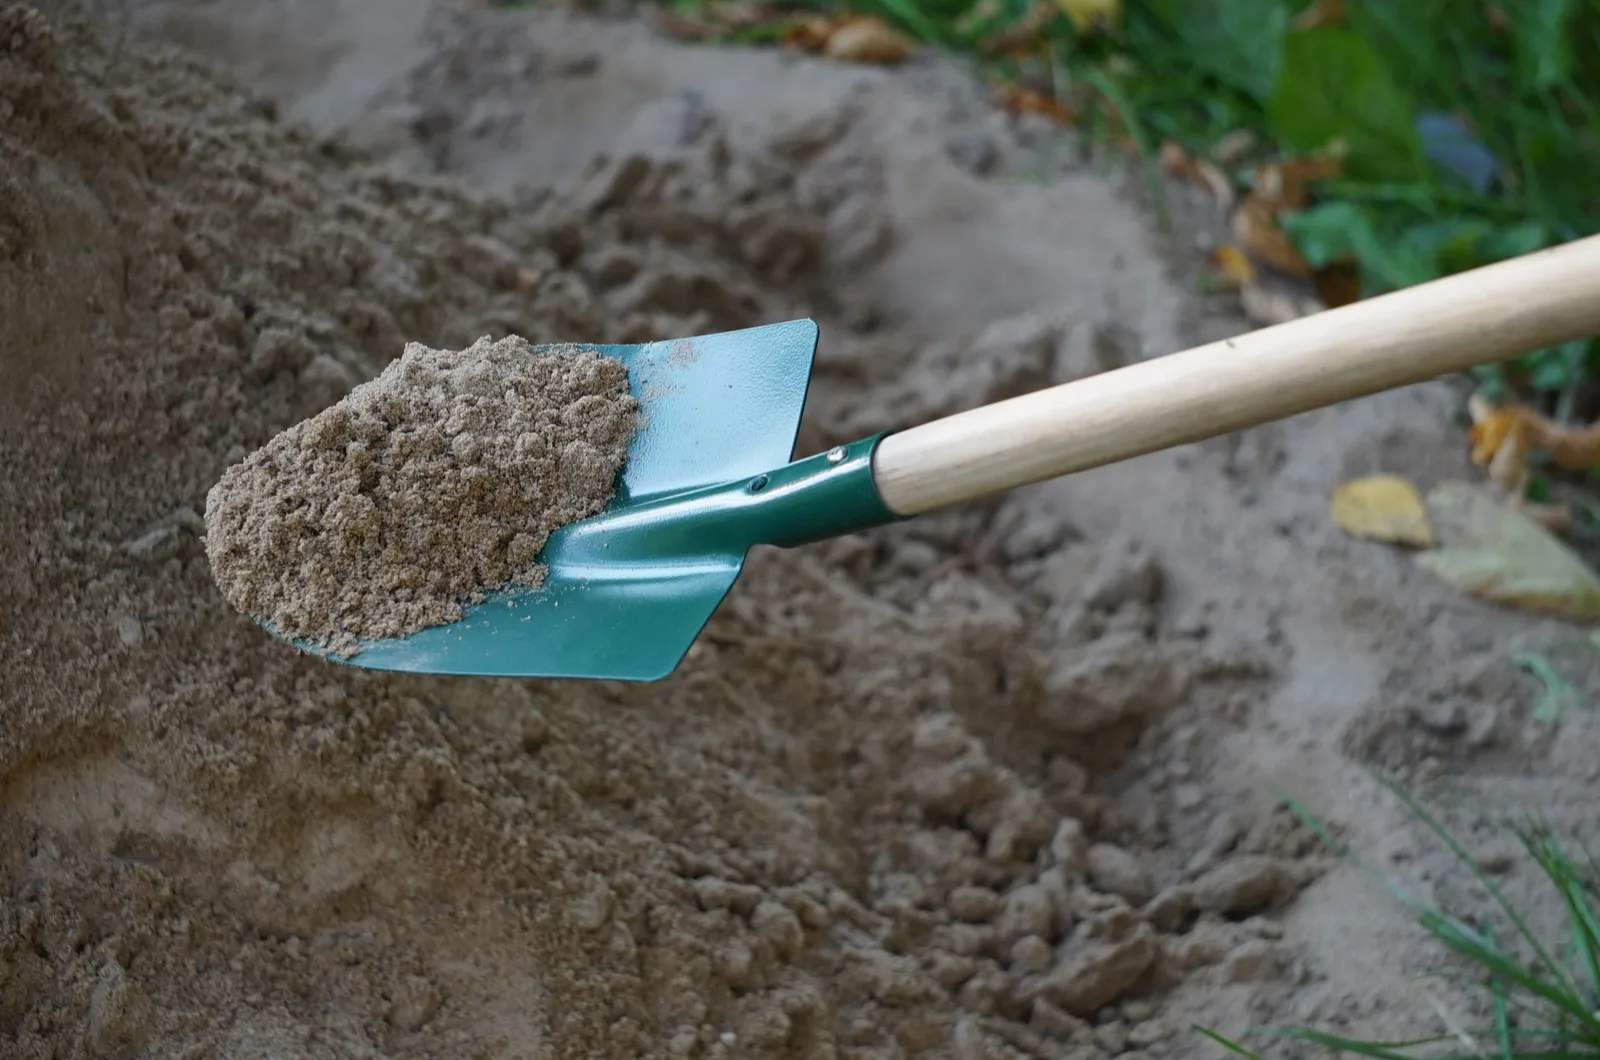 Sand For Gardening: How, When, And Why You Should Use It